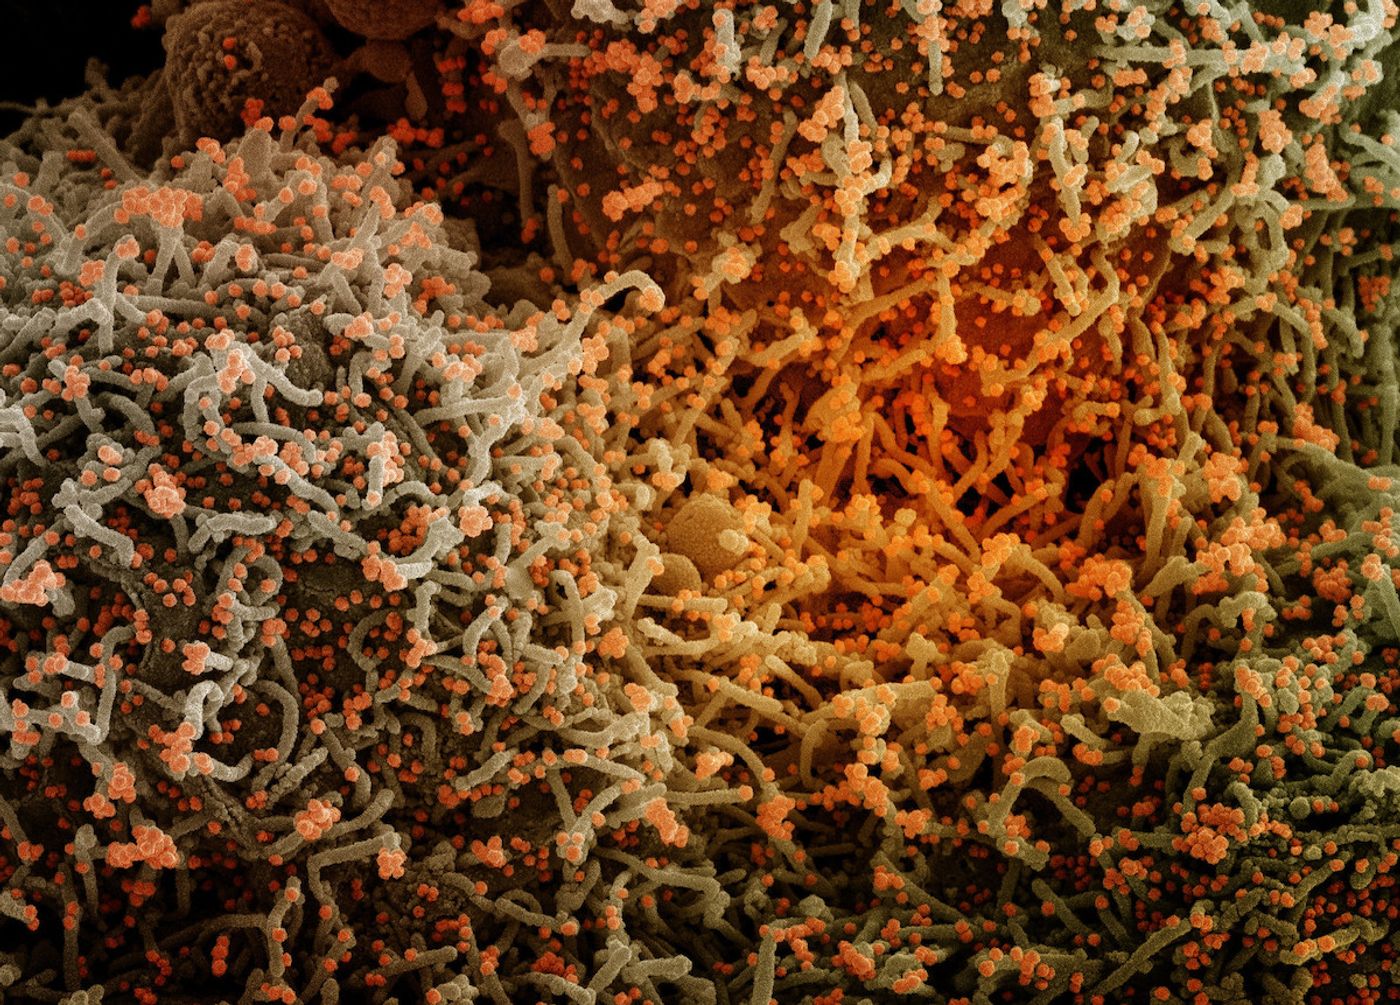 (Cropped from) A scanning electron micrograph of a cell (green) infected with a variant strain of SARS-CoV-2 virus particles (orange), isolated from a patient sample and colorized in Halloween colors. Image captured at the NIAID Integrated Research Facility (IRF) in Fort Detrick, Maryland. Stay safe and have a Happy Halloween! Credit: NIAID